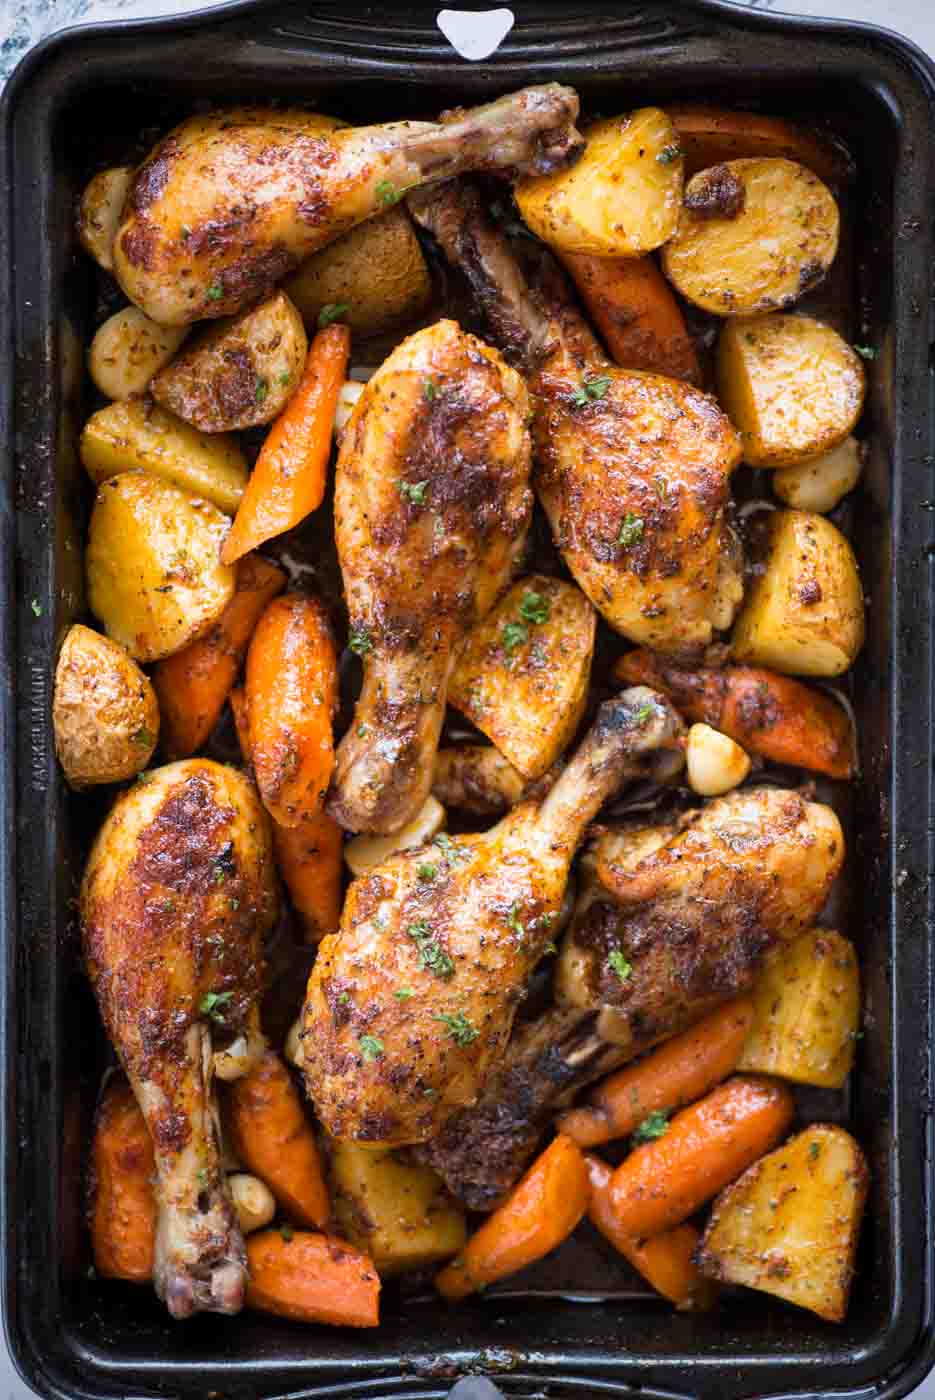 How To Bake Chicken Drumsticks In An Electric Skillet?